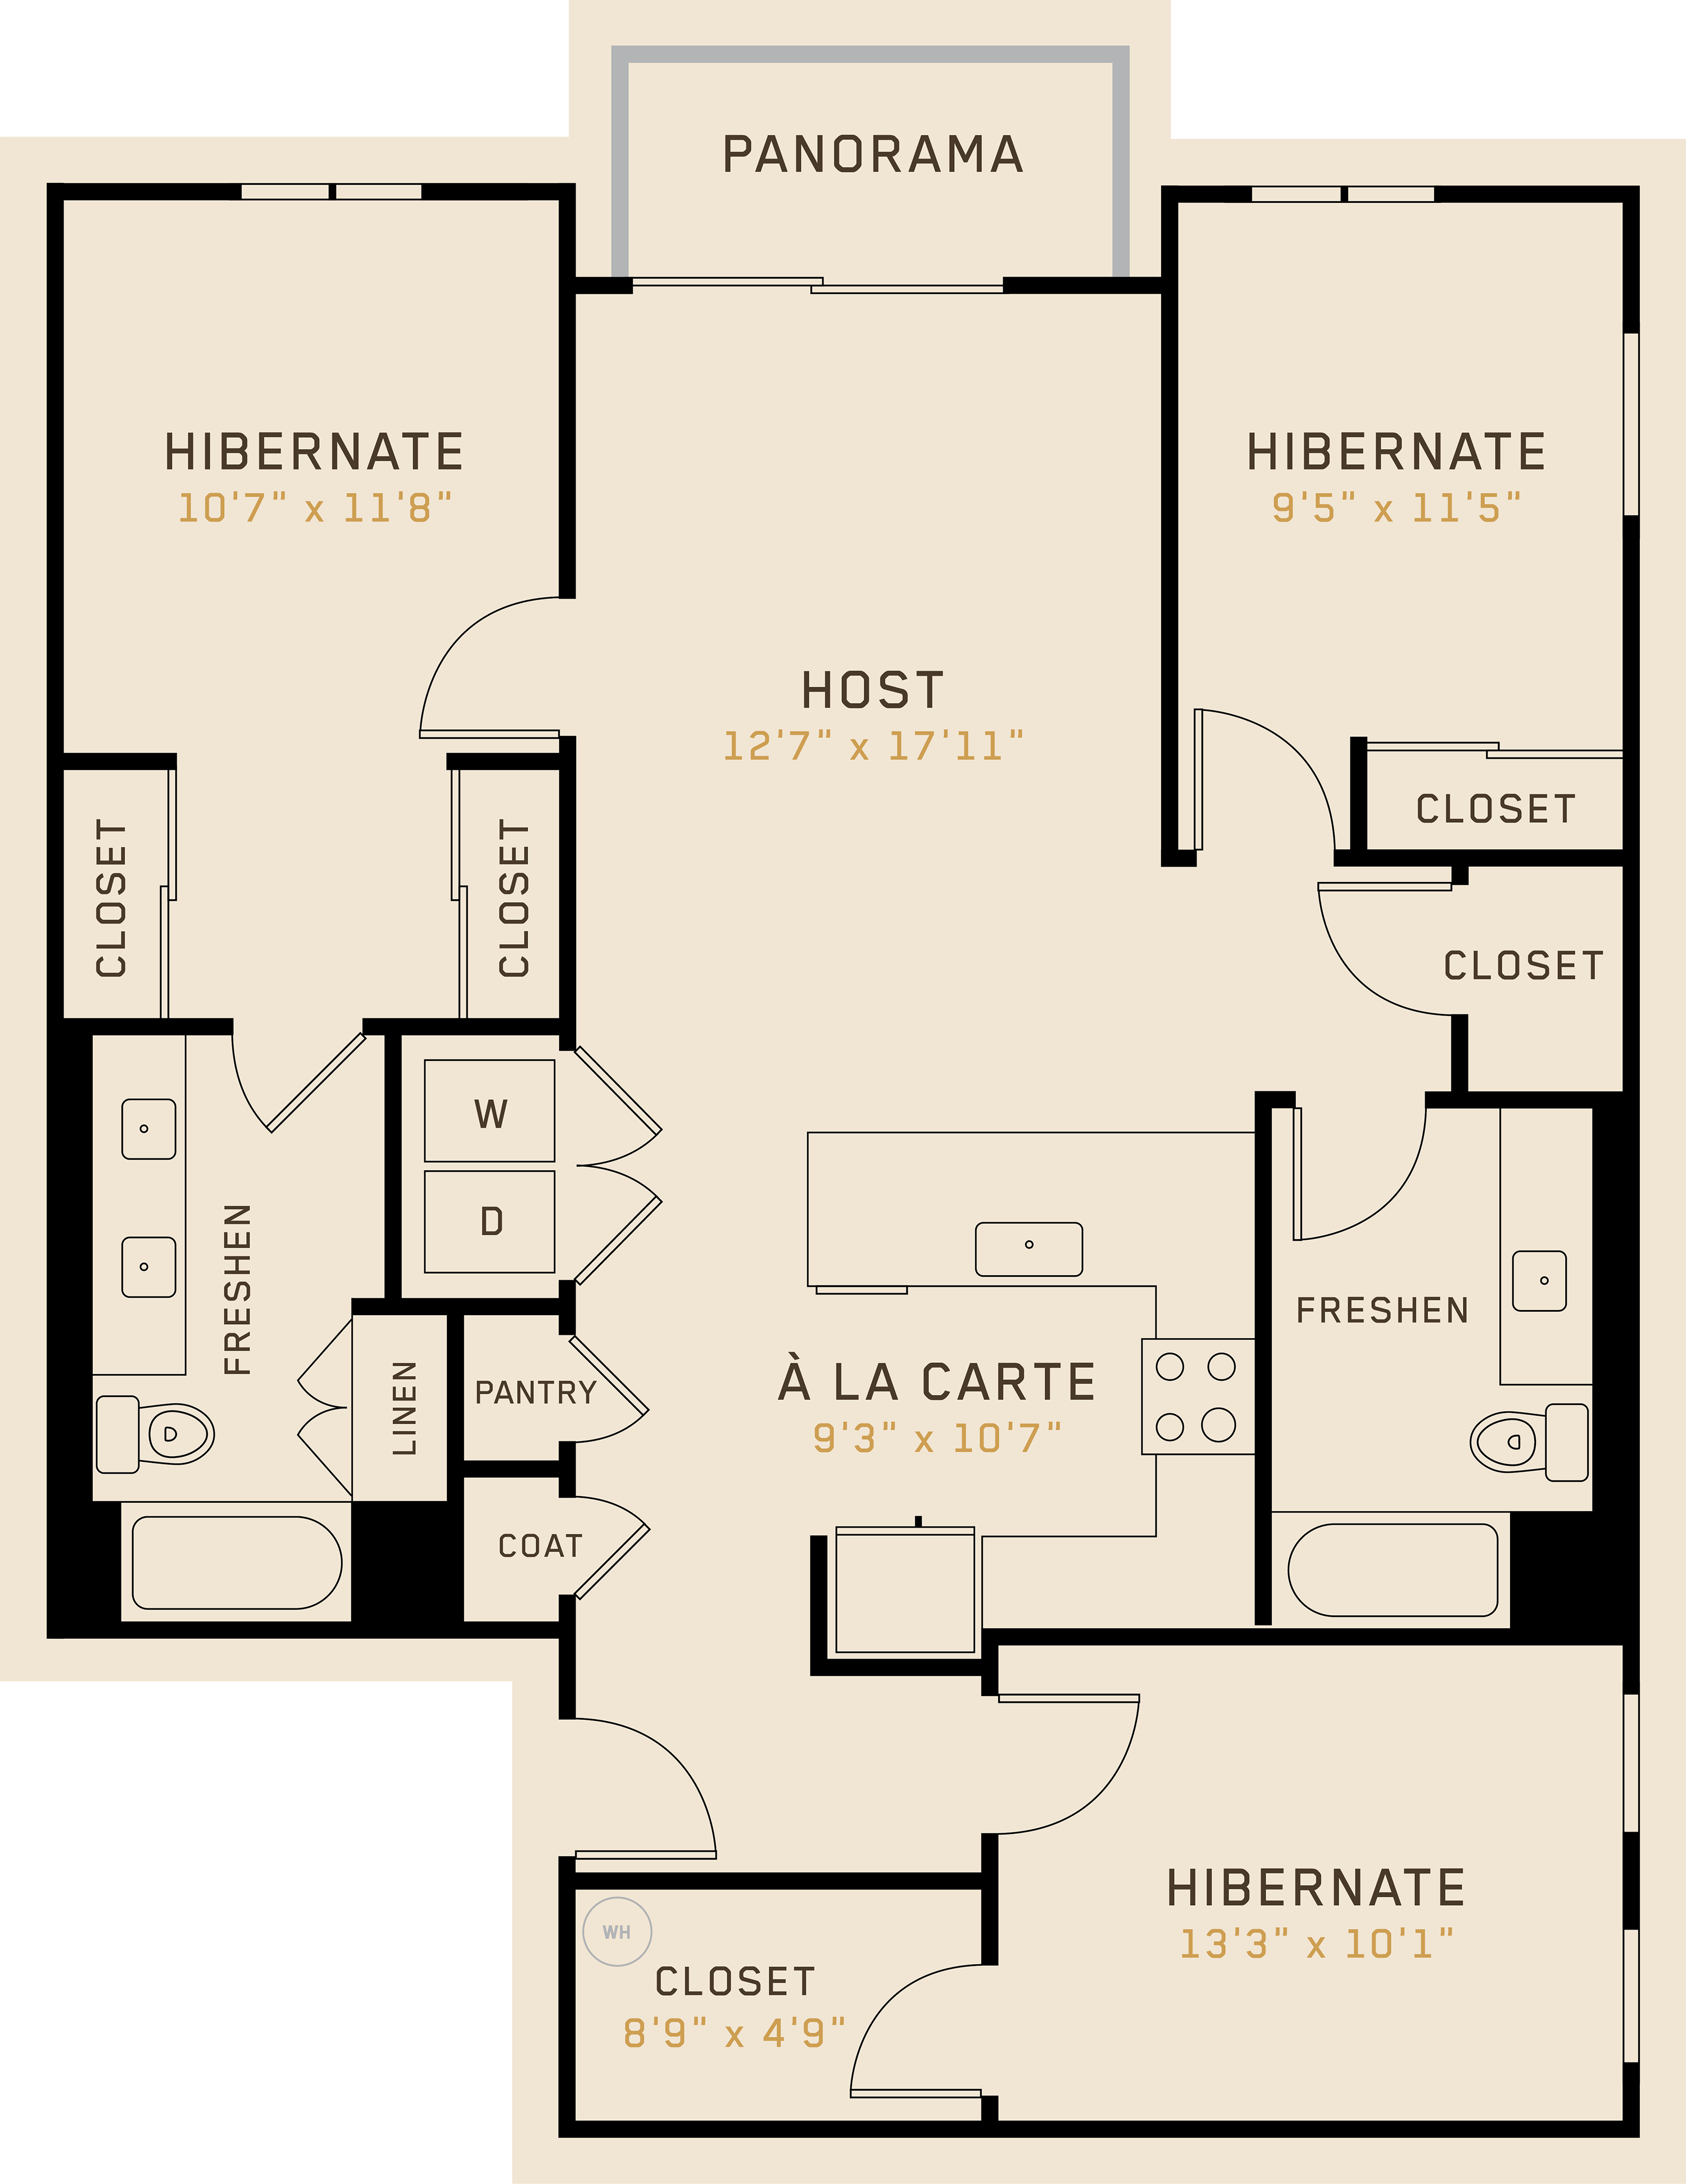 C2A floor plan featuring 3 bedrooms, 2 bathrooms, and is 1,299 square feet